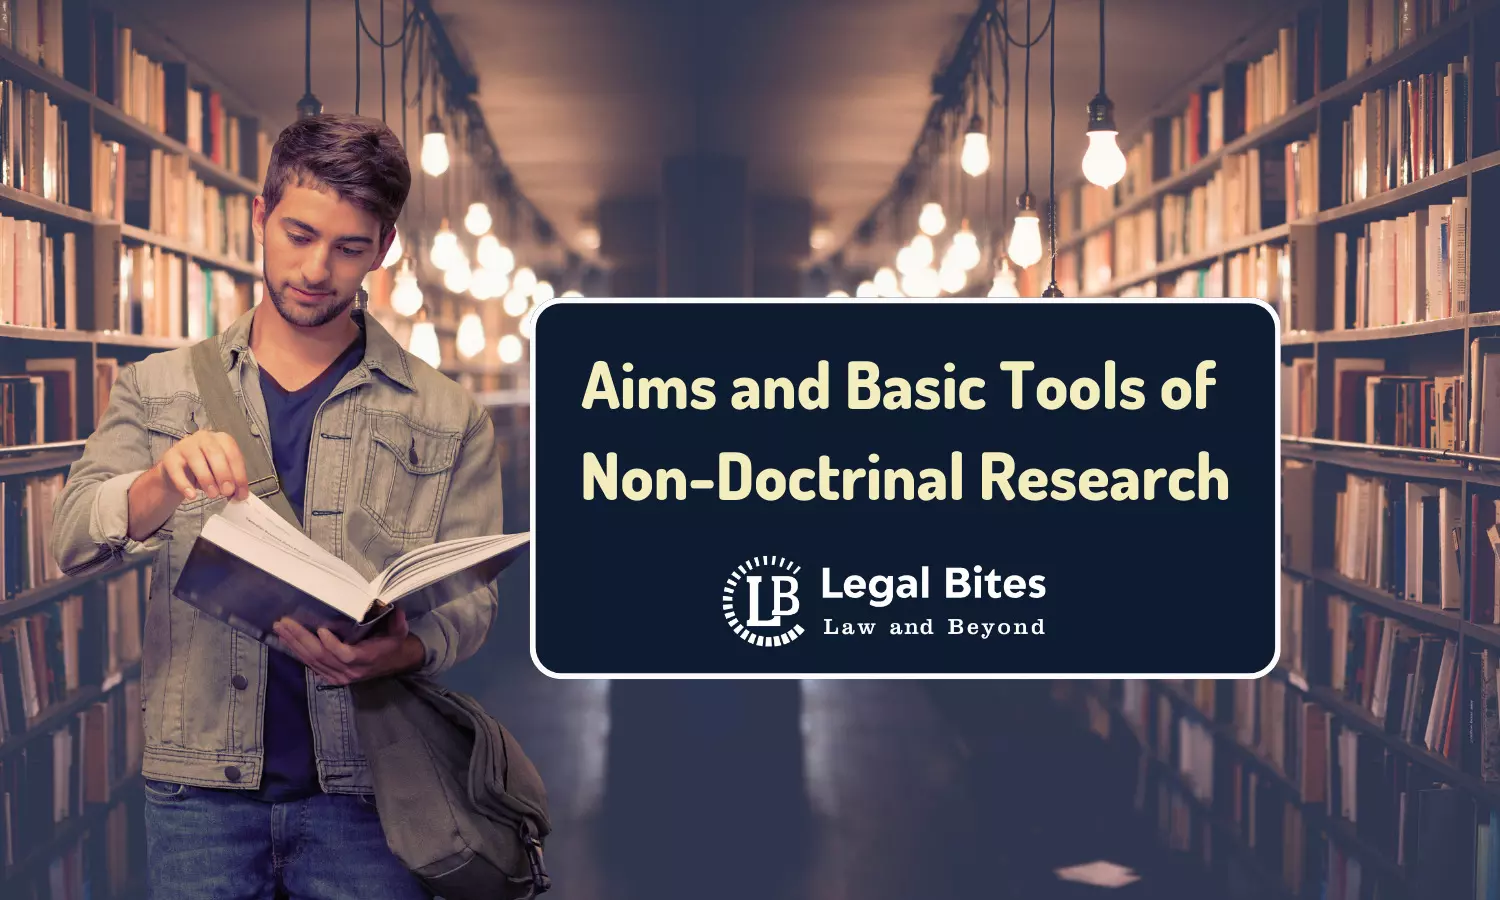 Aims and Basic Tools of Non-Doctrinal Research